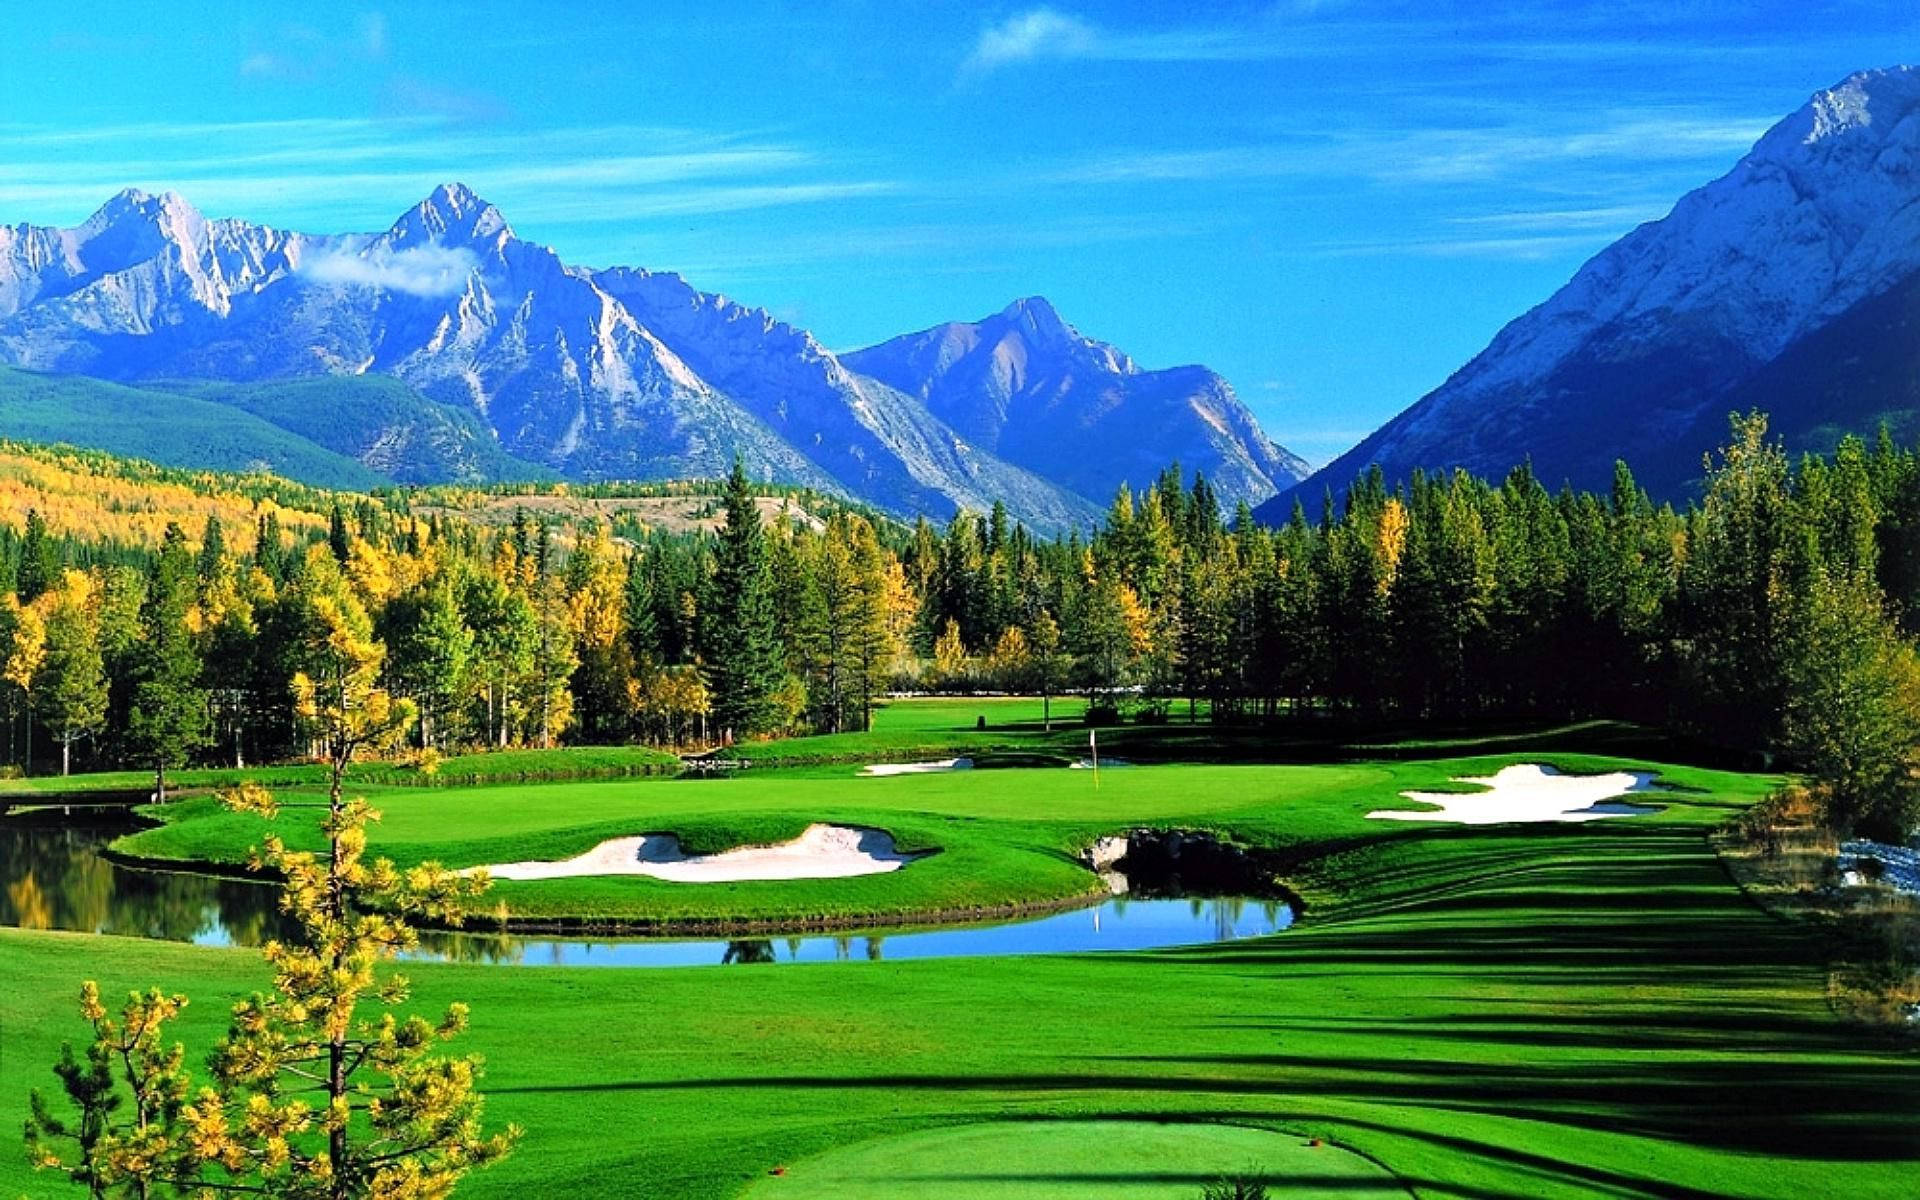 Cool Golf Kananaskis Country Course With Mountains Wallpaper